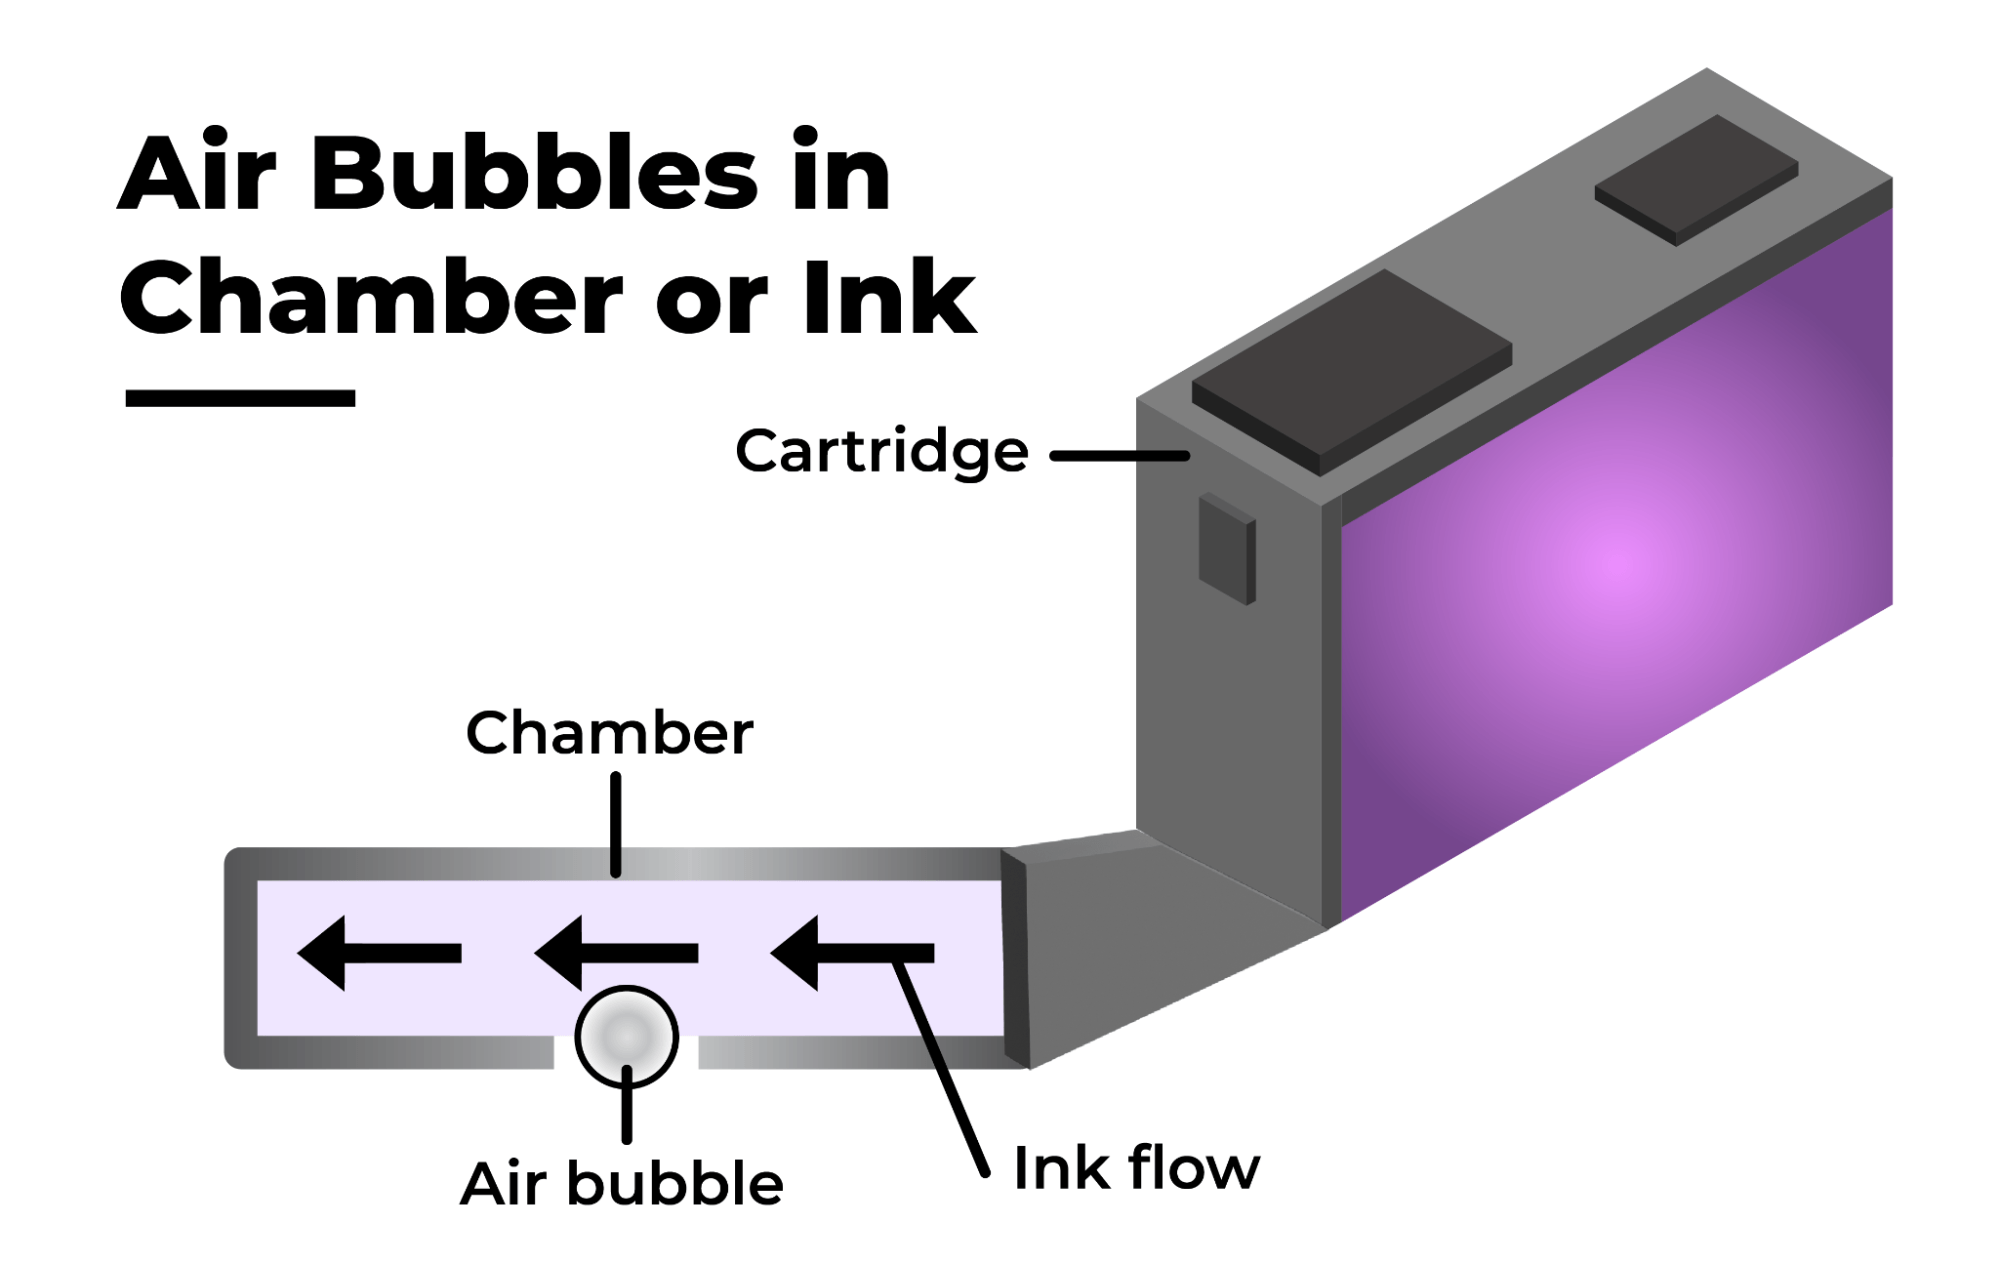 Illustration of air bubbles in ink cartridge